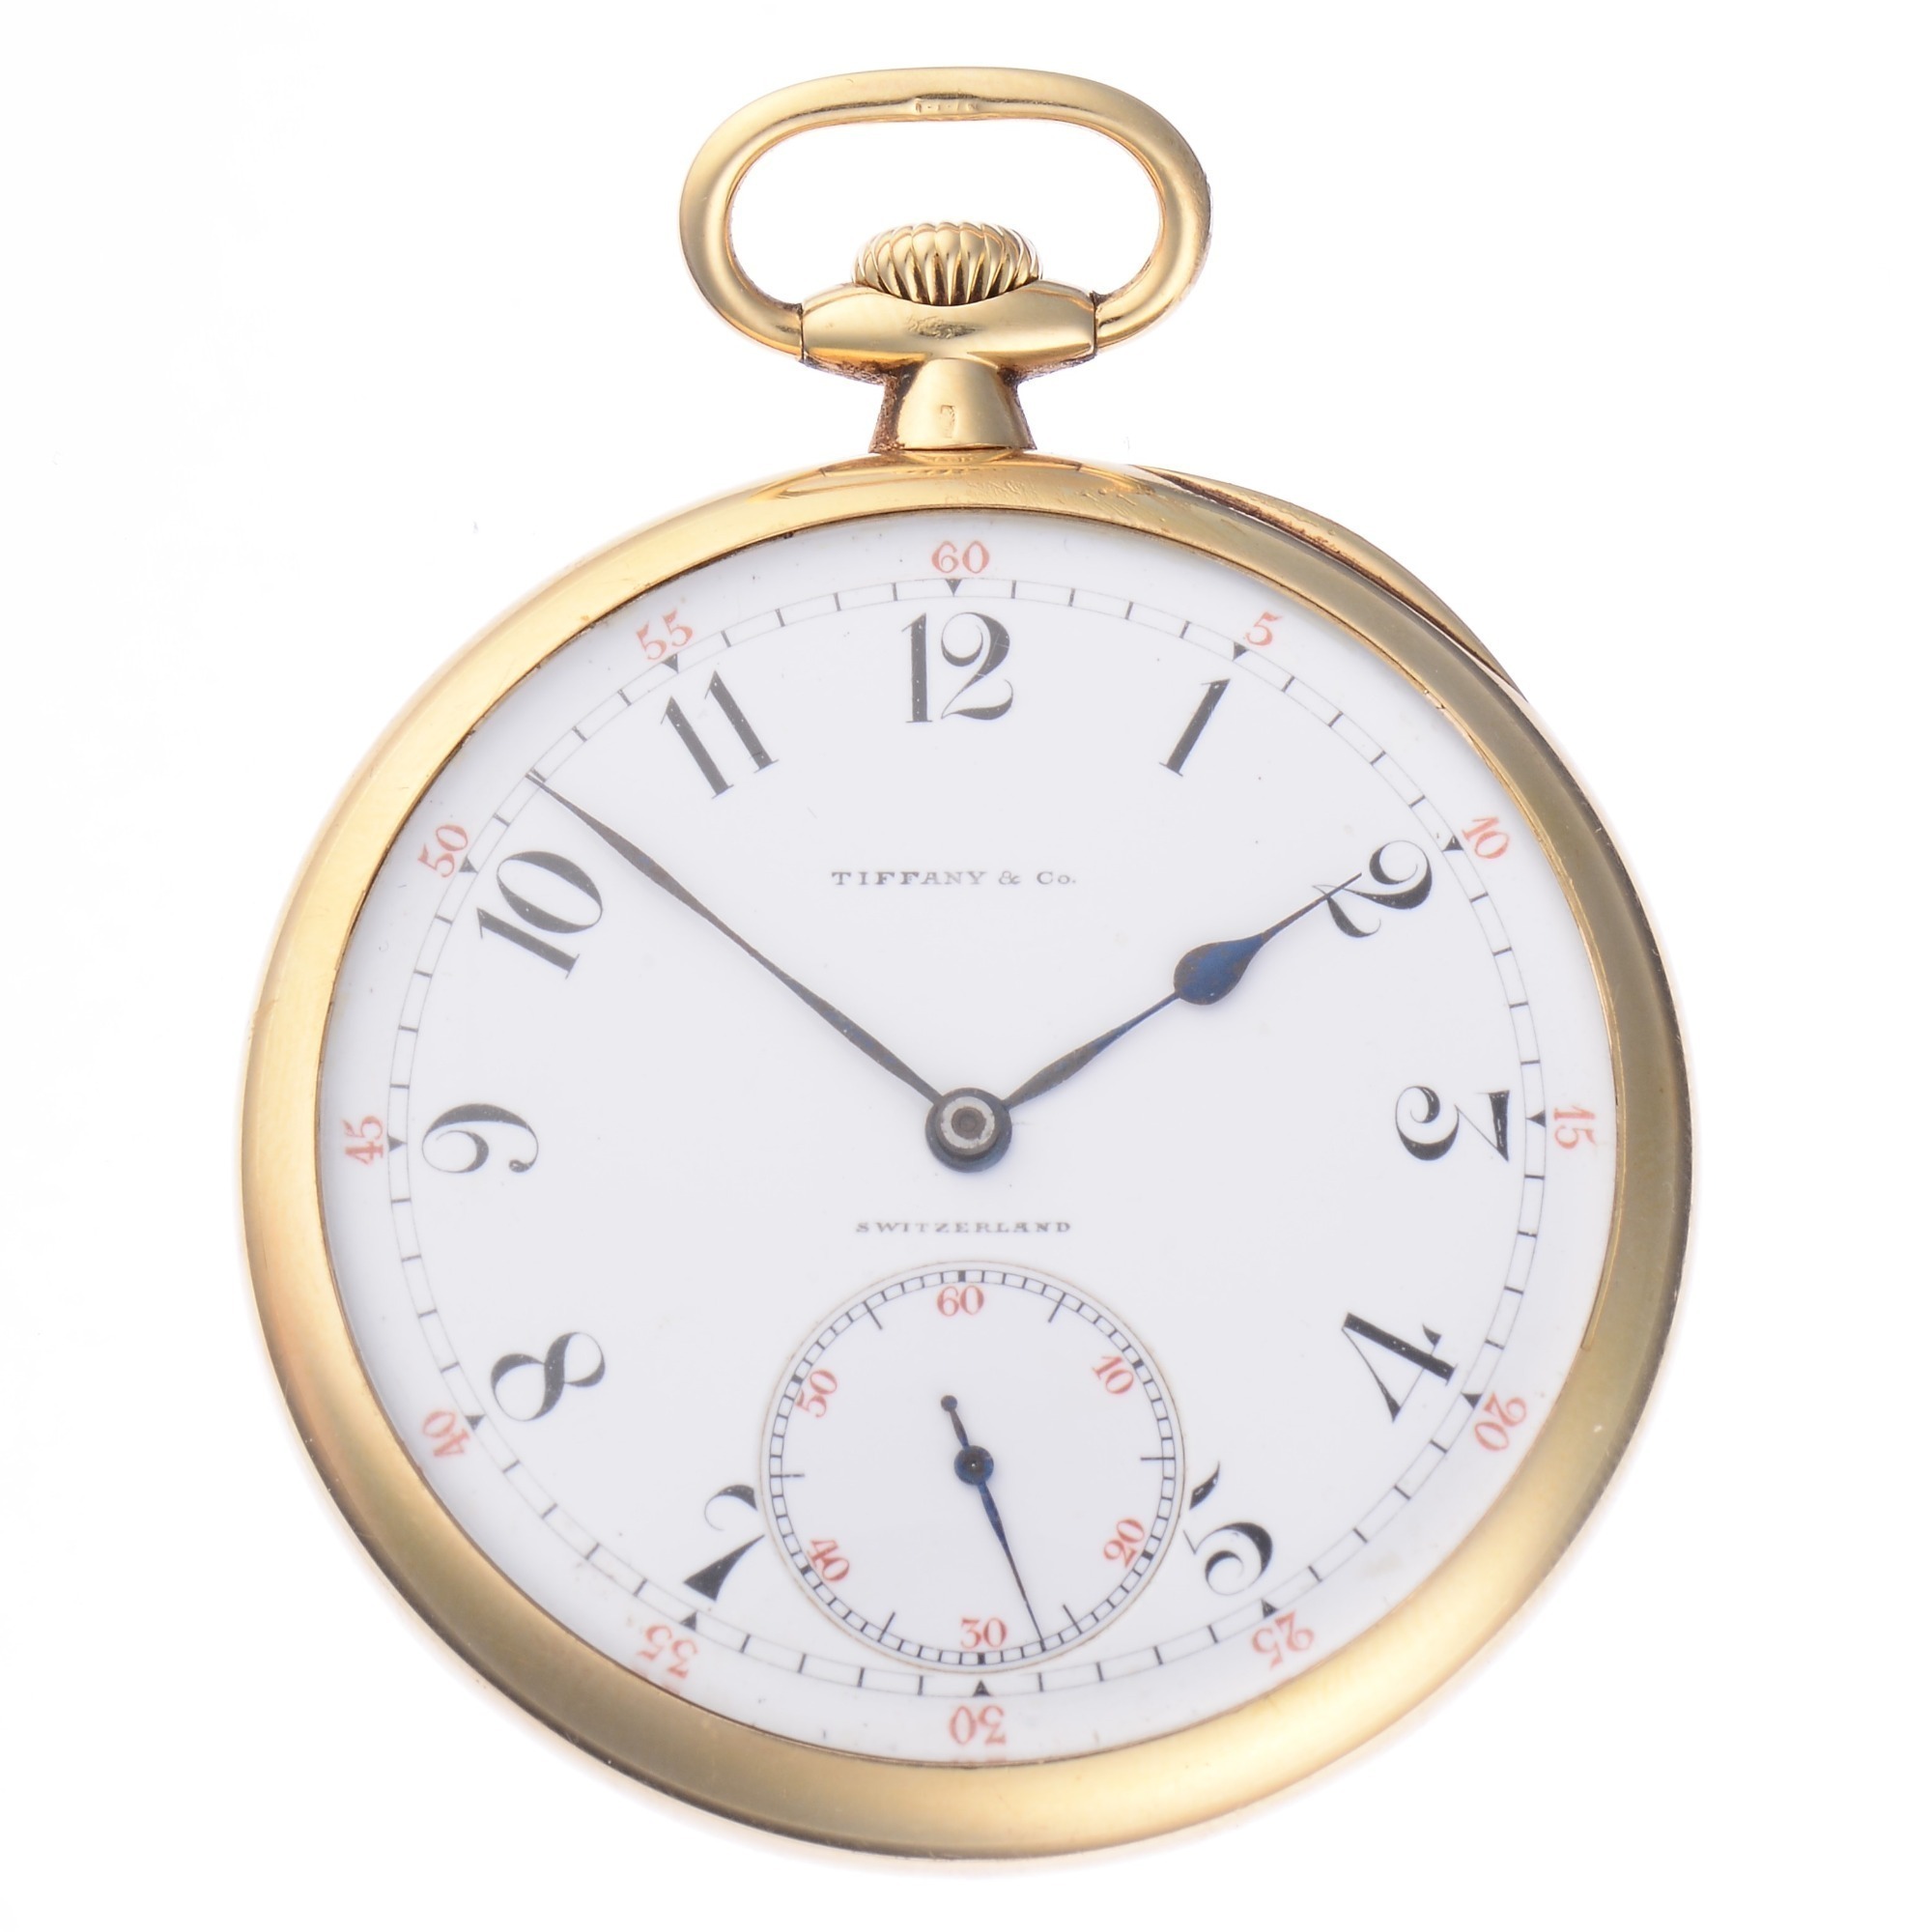 Patek Philippe For Tiffany and Co. 18K Gold Pocket Watch